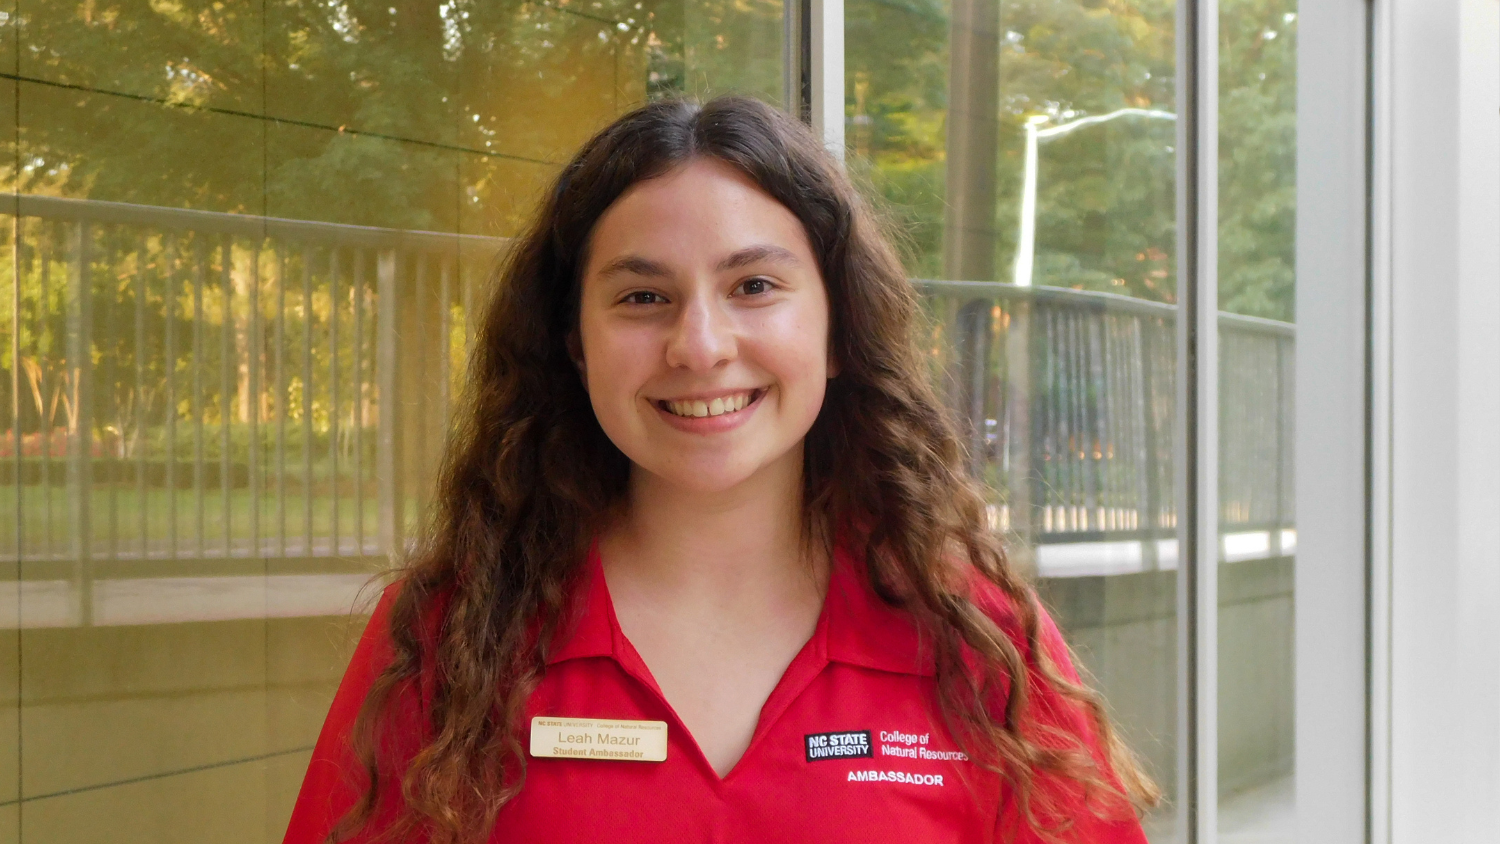 Leah Mazur - College of Natural Resources Ambassadors - College of Natural Resources at NC State University